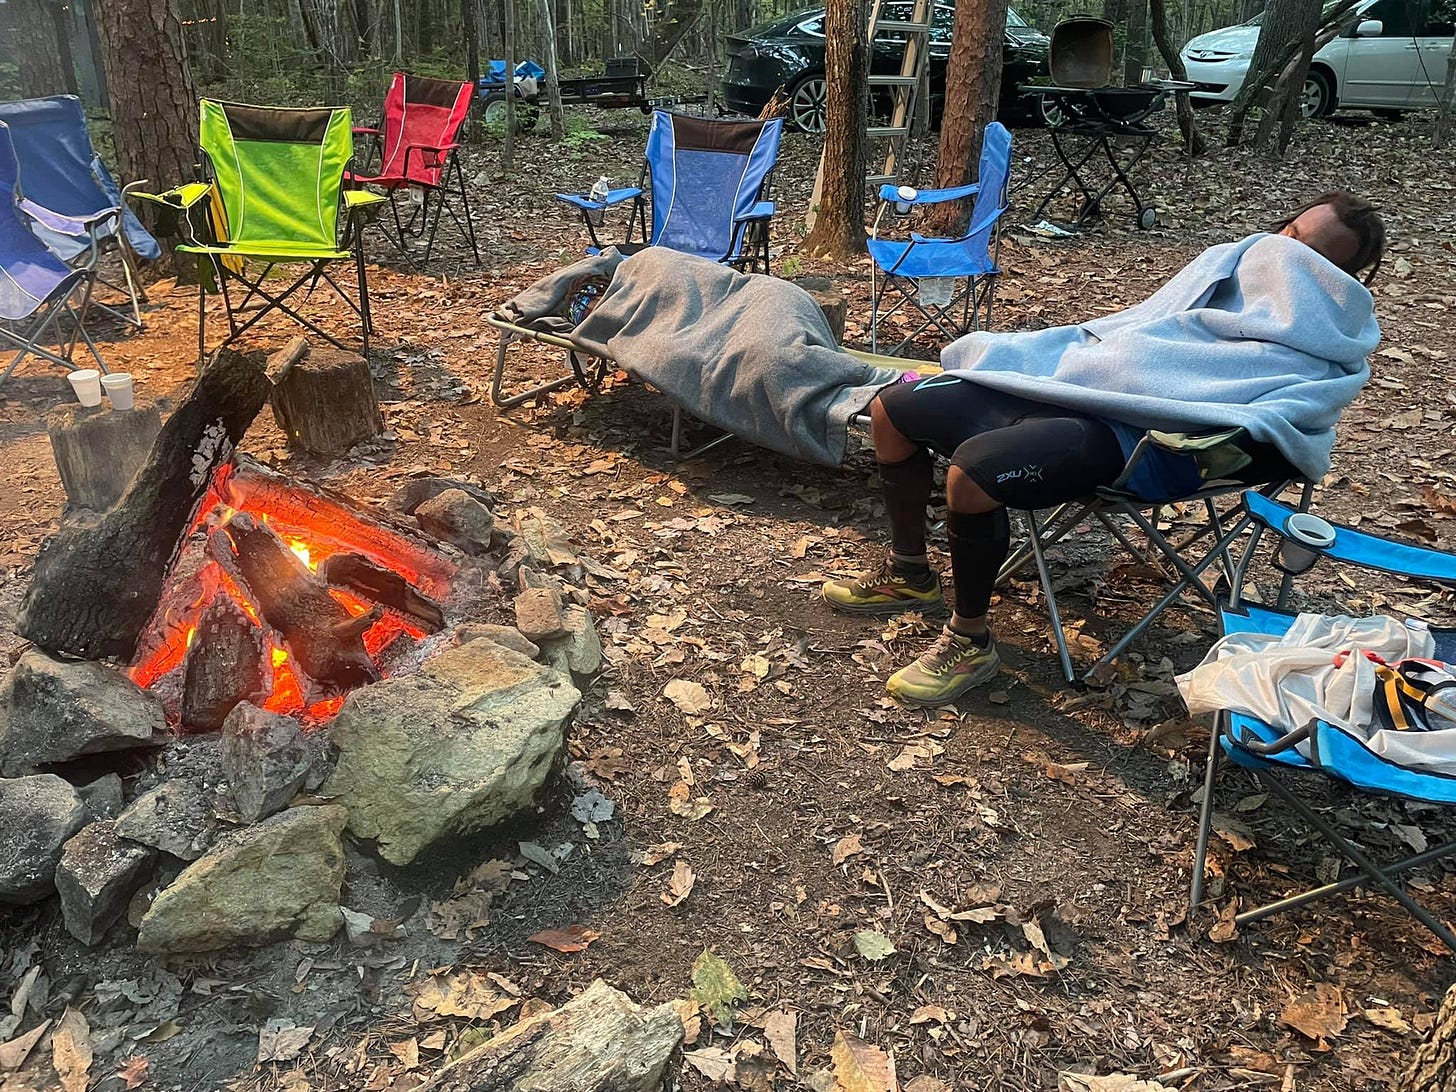 May be an image of one or more people, people camping, people sitting and outdoors